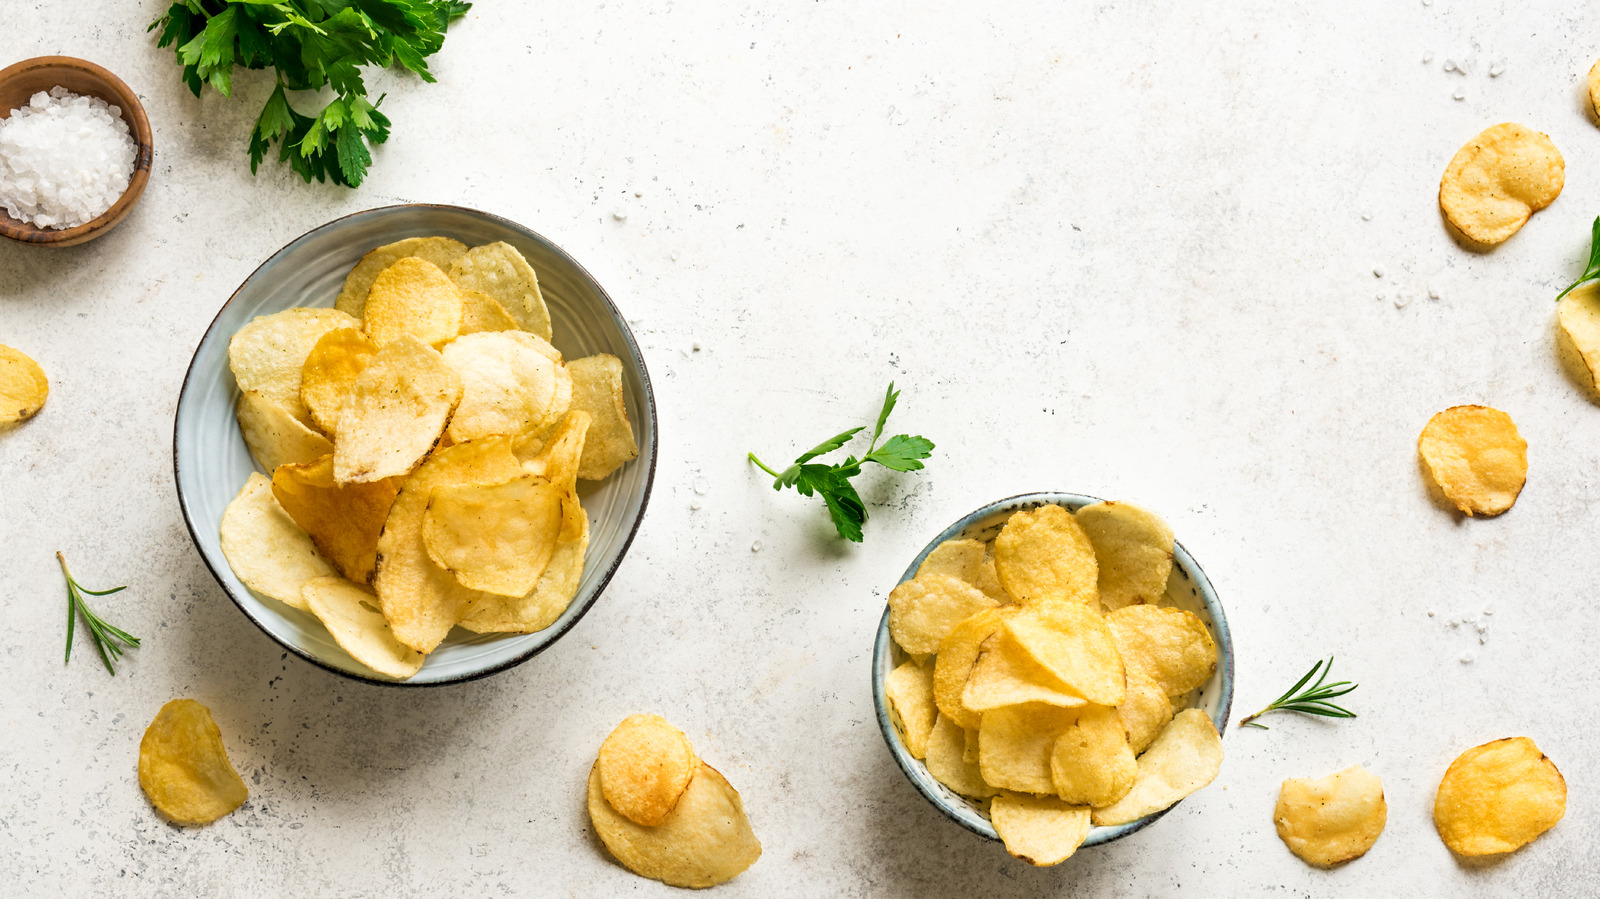 https://www.thedailymeal.com/img/gallery/14-creative-ways-to-use-potato-chips-when-cooking/l-intro-1678799974.jpg